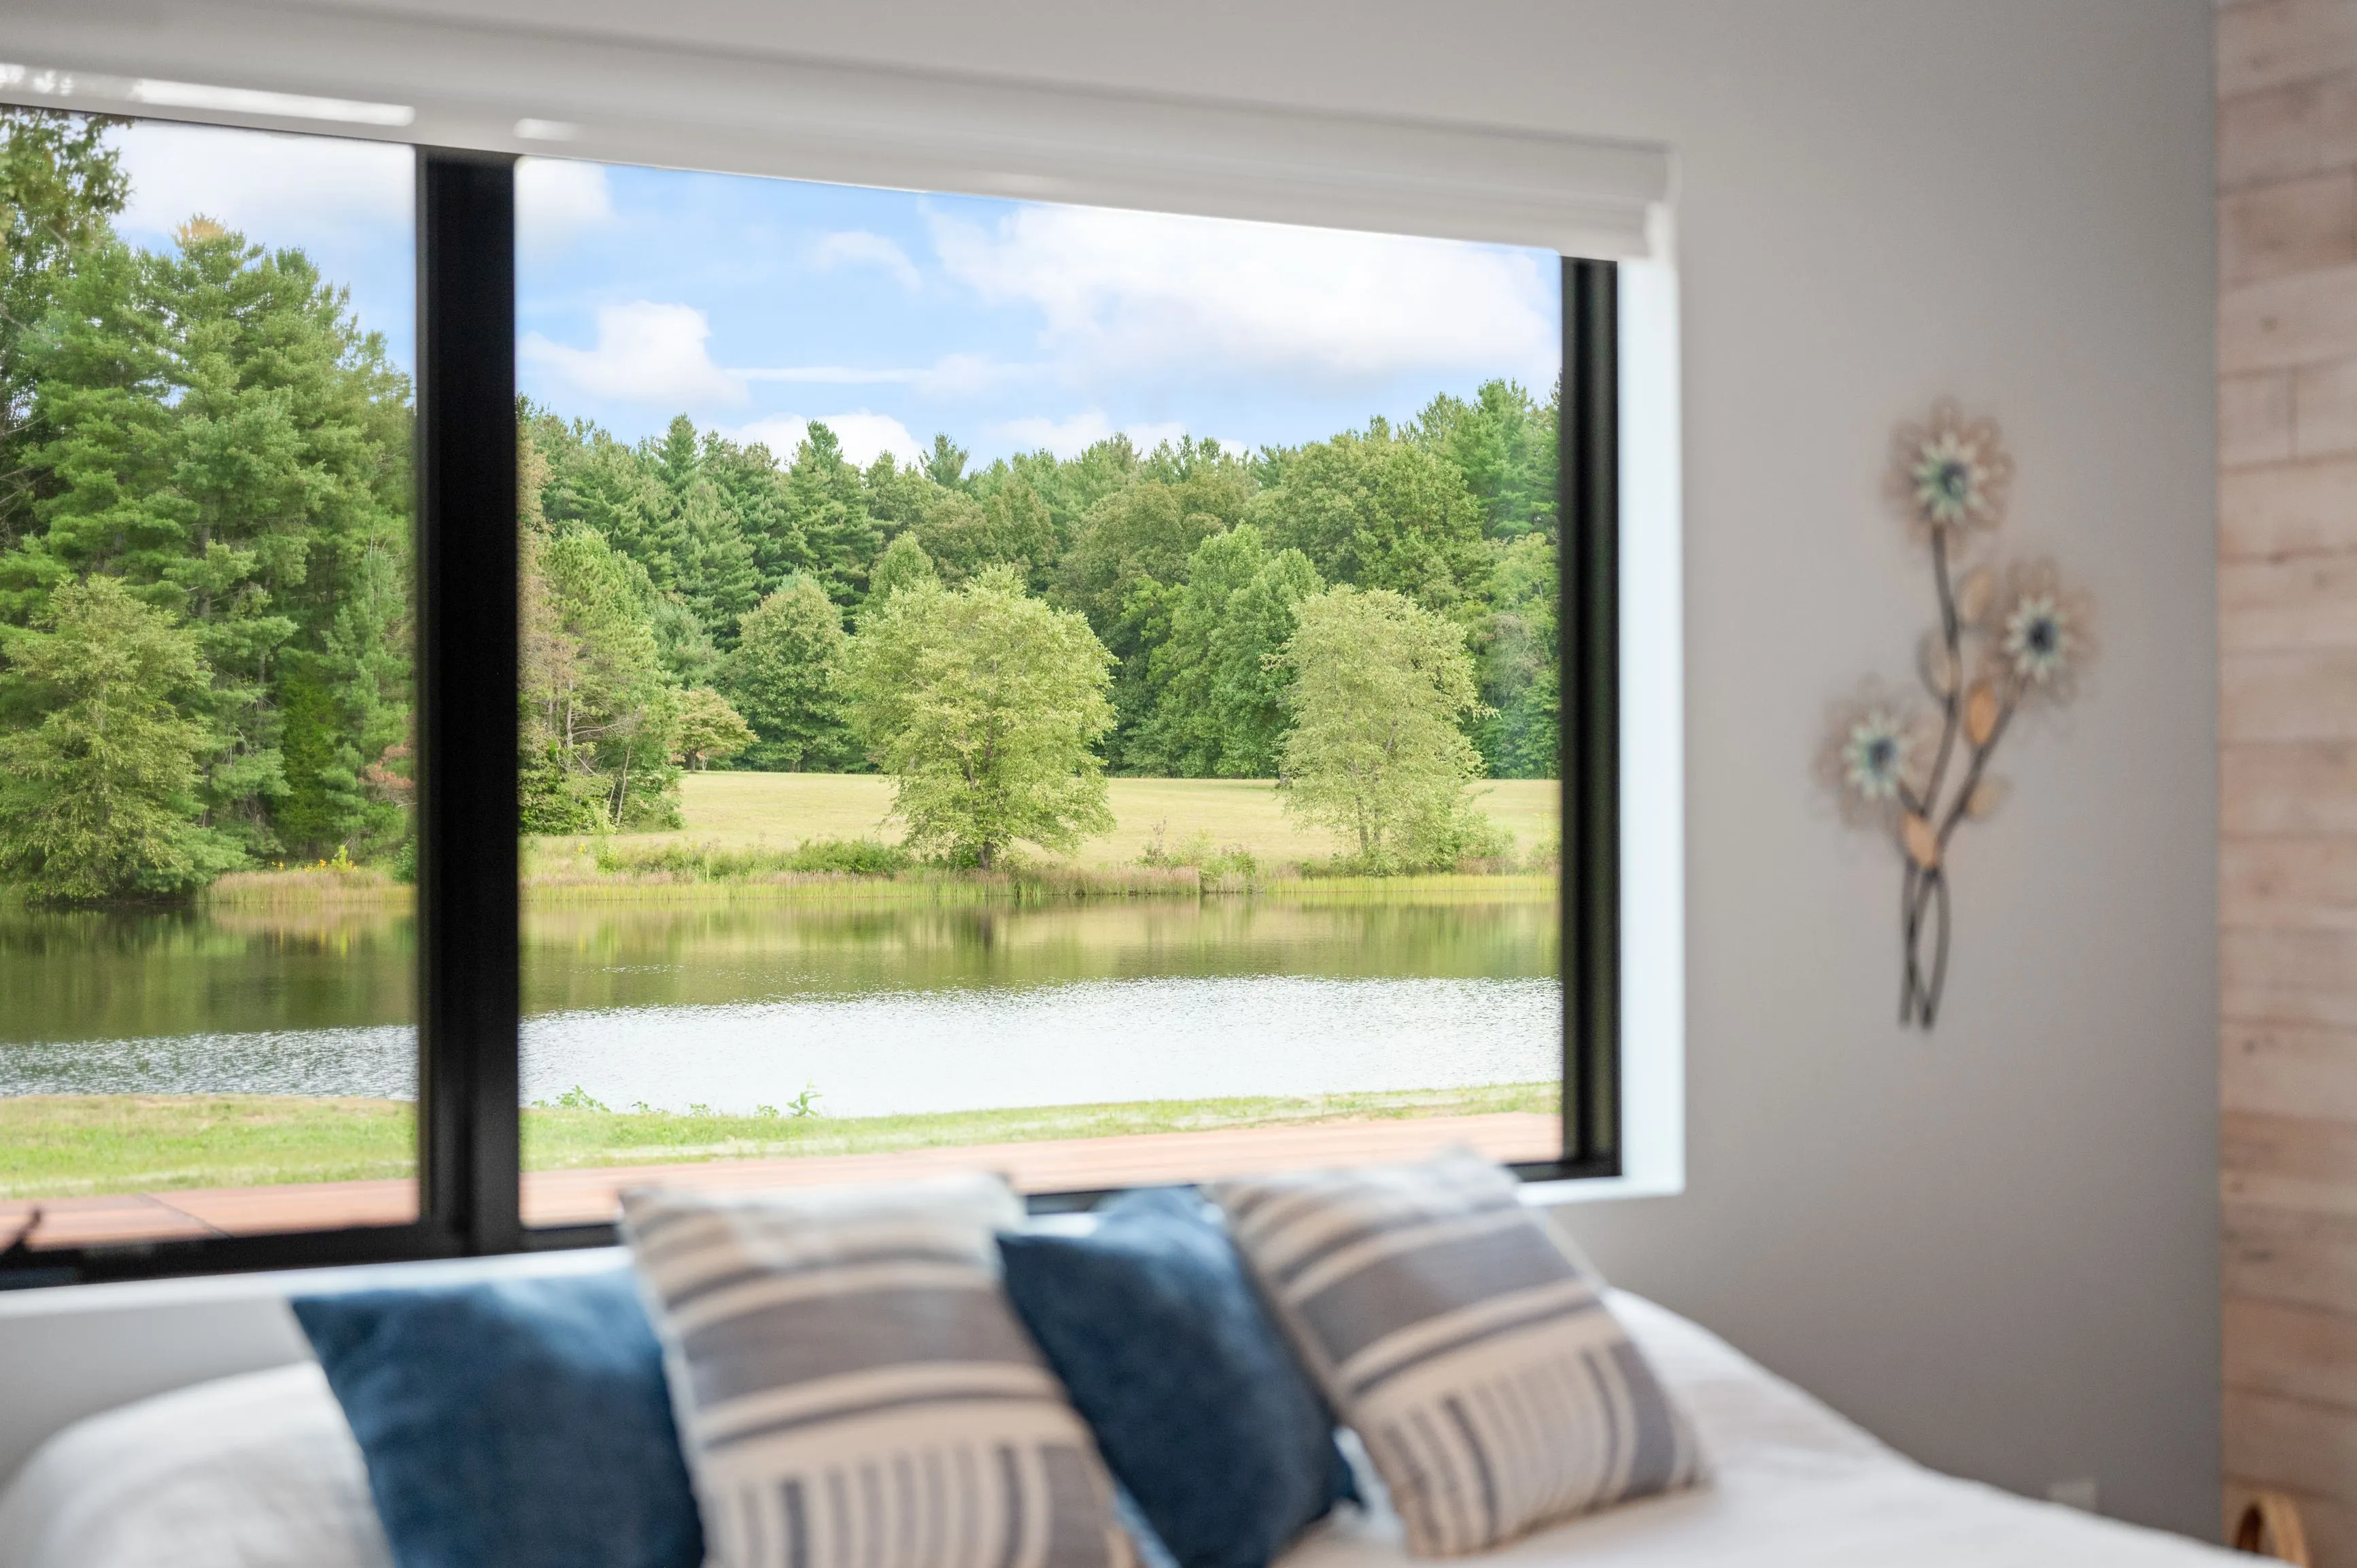 Interior view of a cozy bedroom with a large window overlooking a scenic pond surrounded by trees.